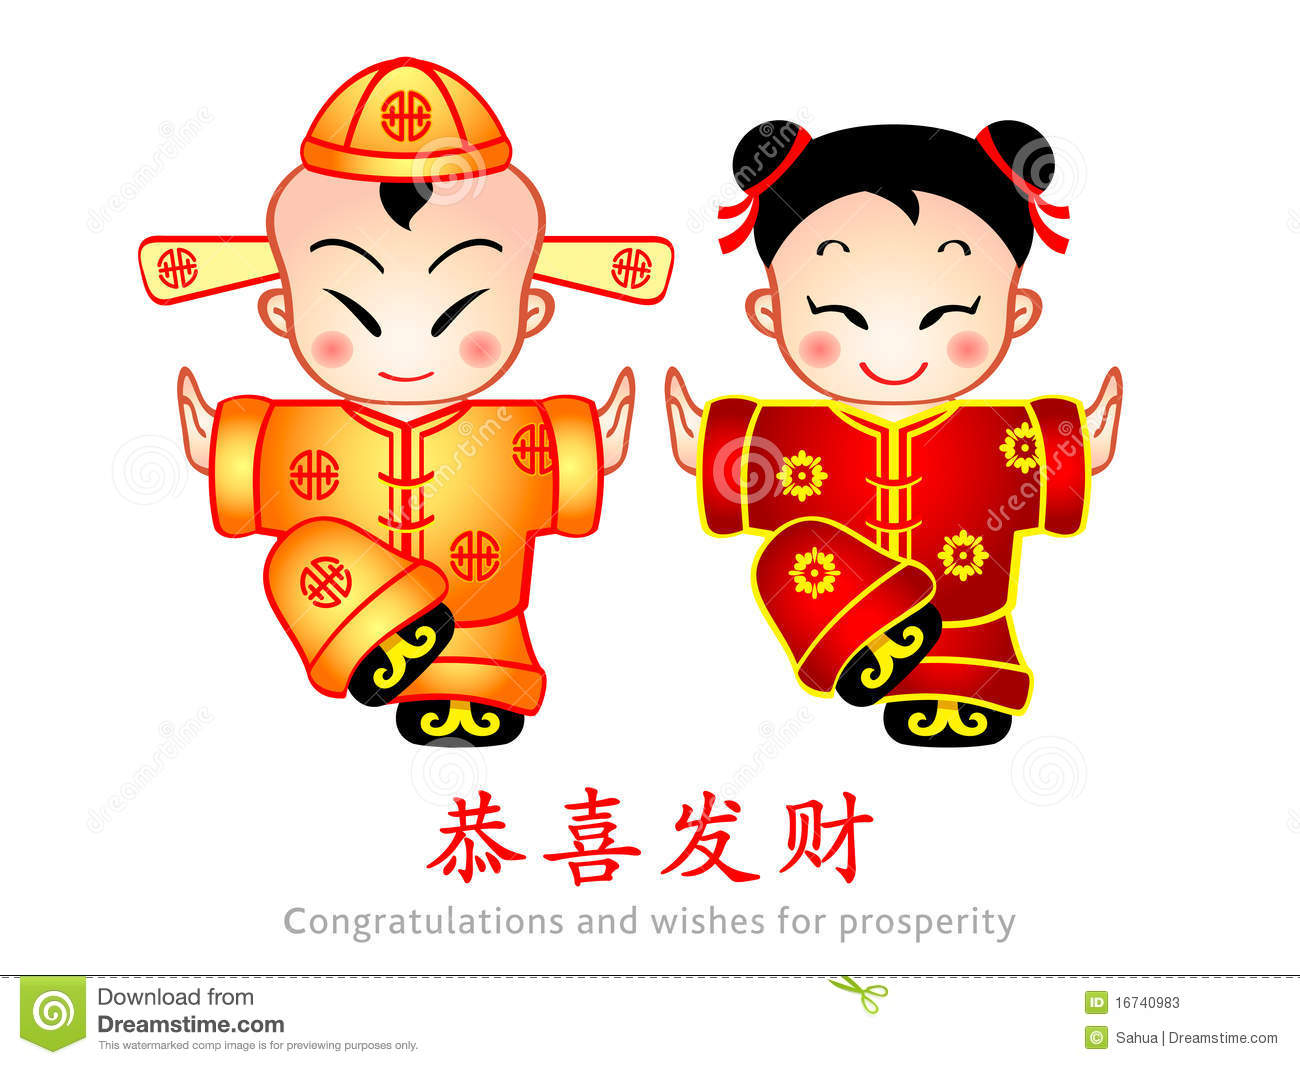 Chinese New Year Congratulations With Smiling Boy And Girl 